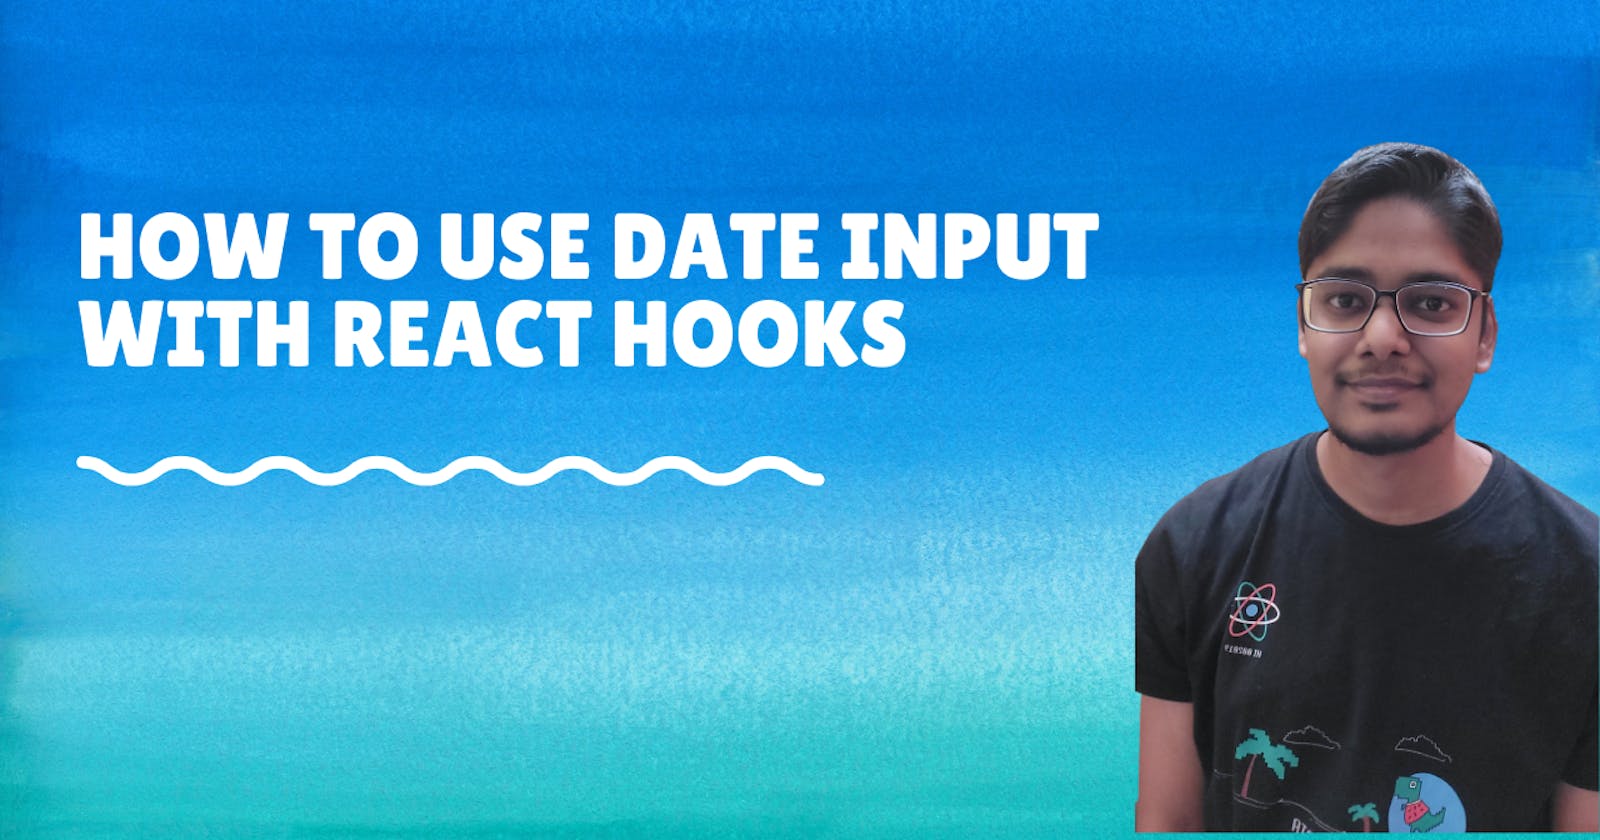 How to use date input with react hooks